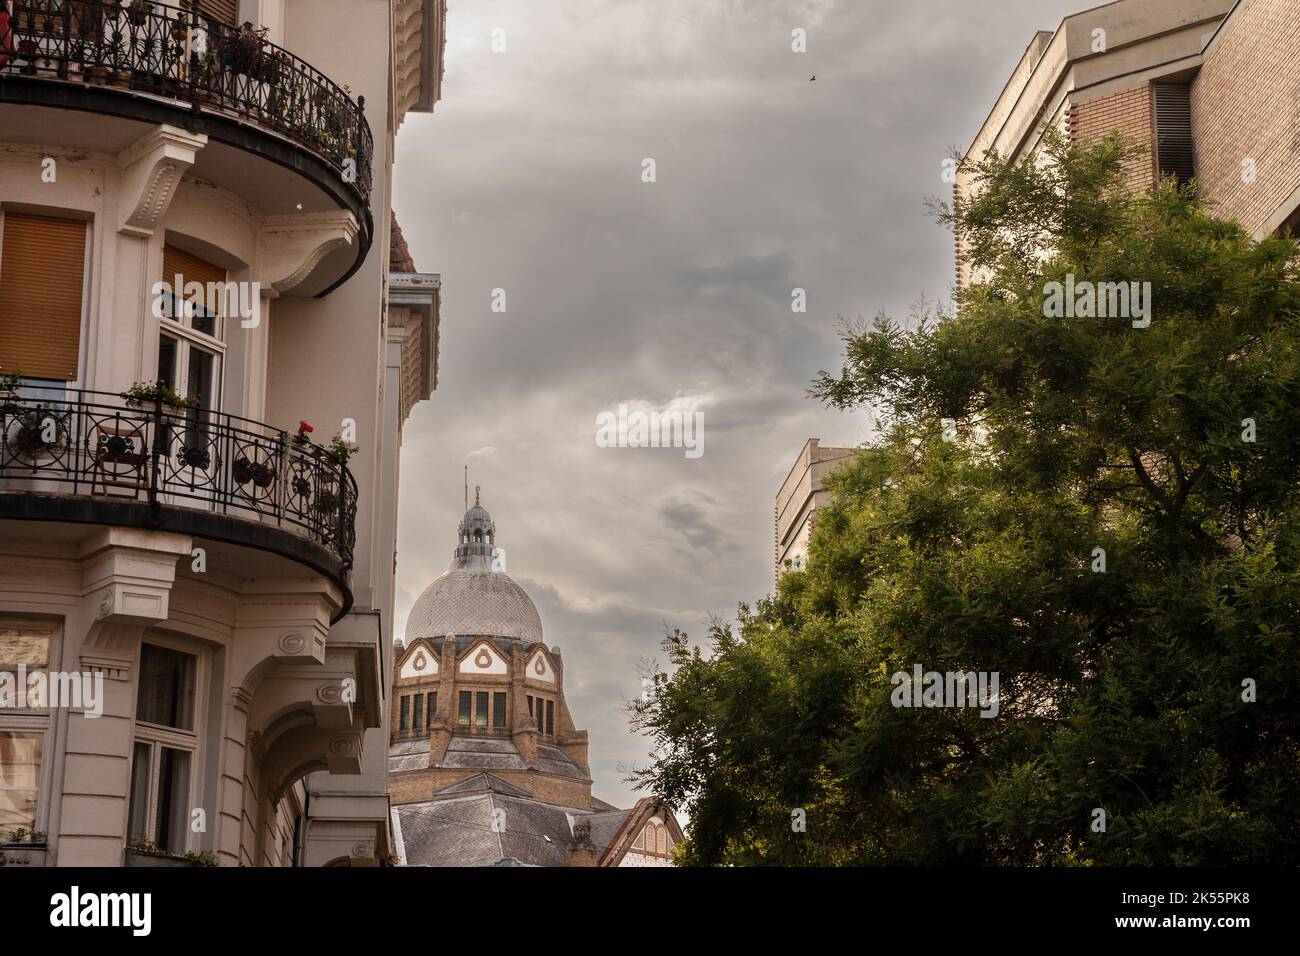 Picture of Novi Sad Synagogue, also known as sinagoga u novom sadu, in the end of the afternoon, in Novi Sad, Serbia. Novi Sad Synagogue  is one of ma Stock Photo